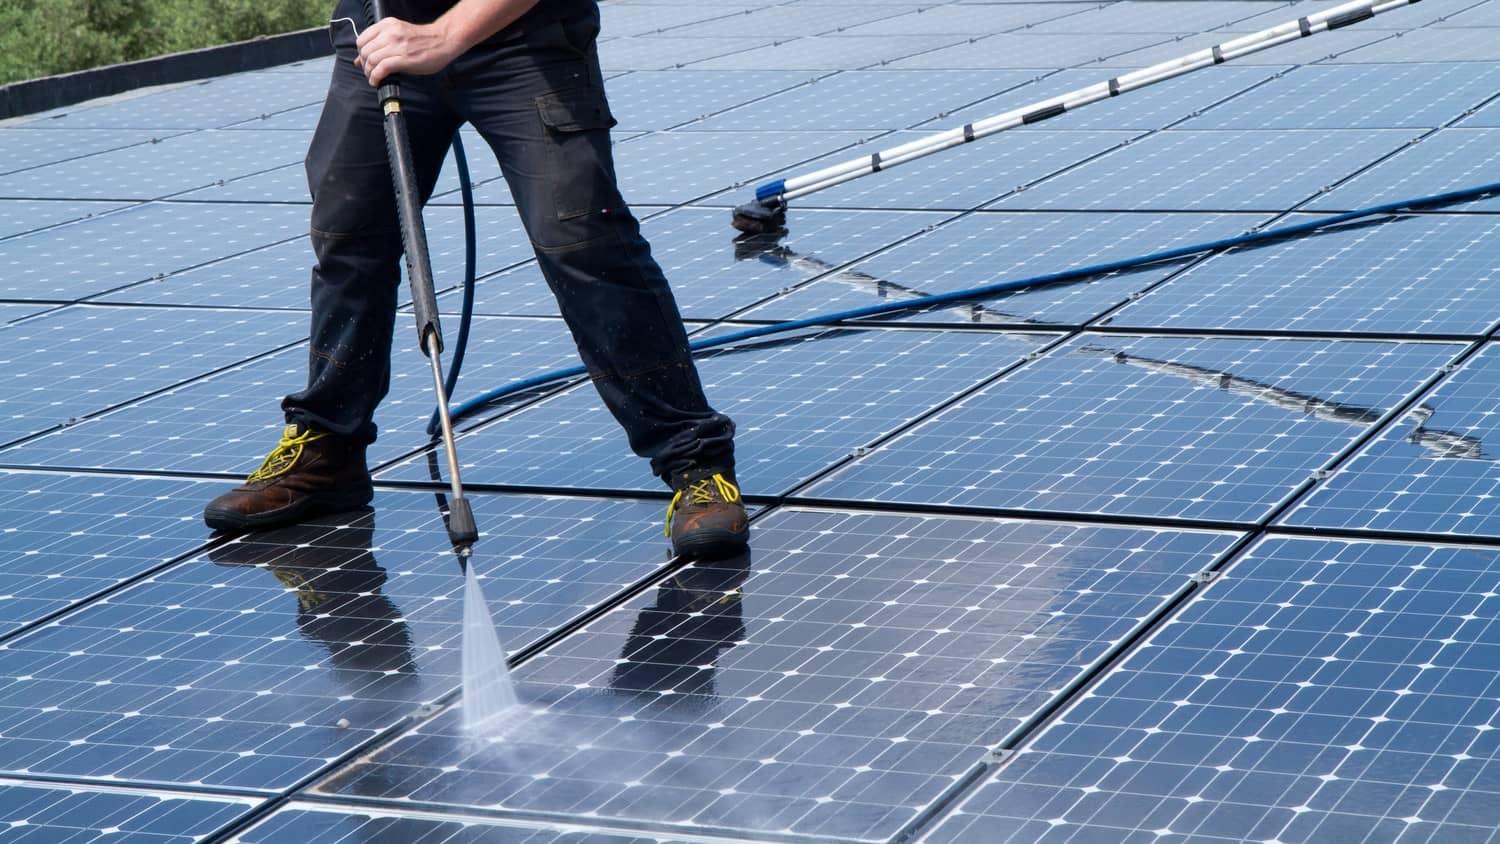 A person cleaning solar panels on a rooftop with a brush and water, ensuring maximum efficiency and energy production.